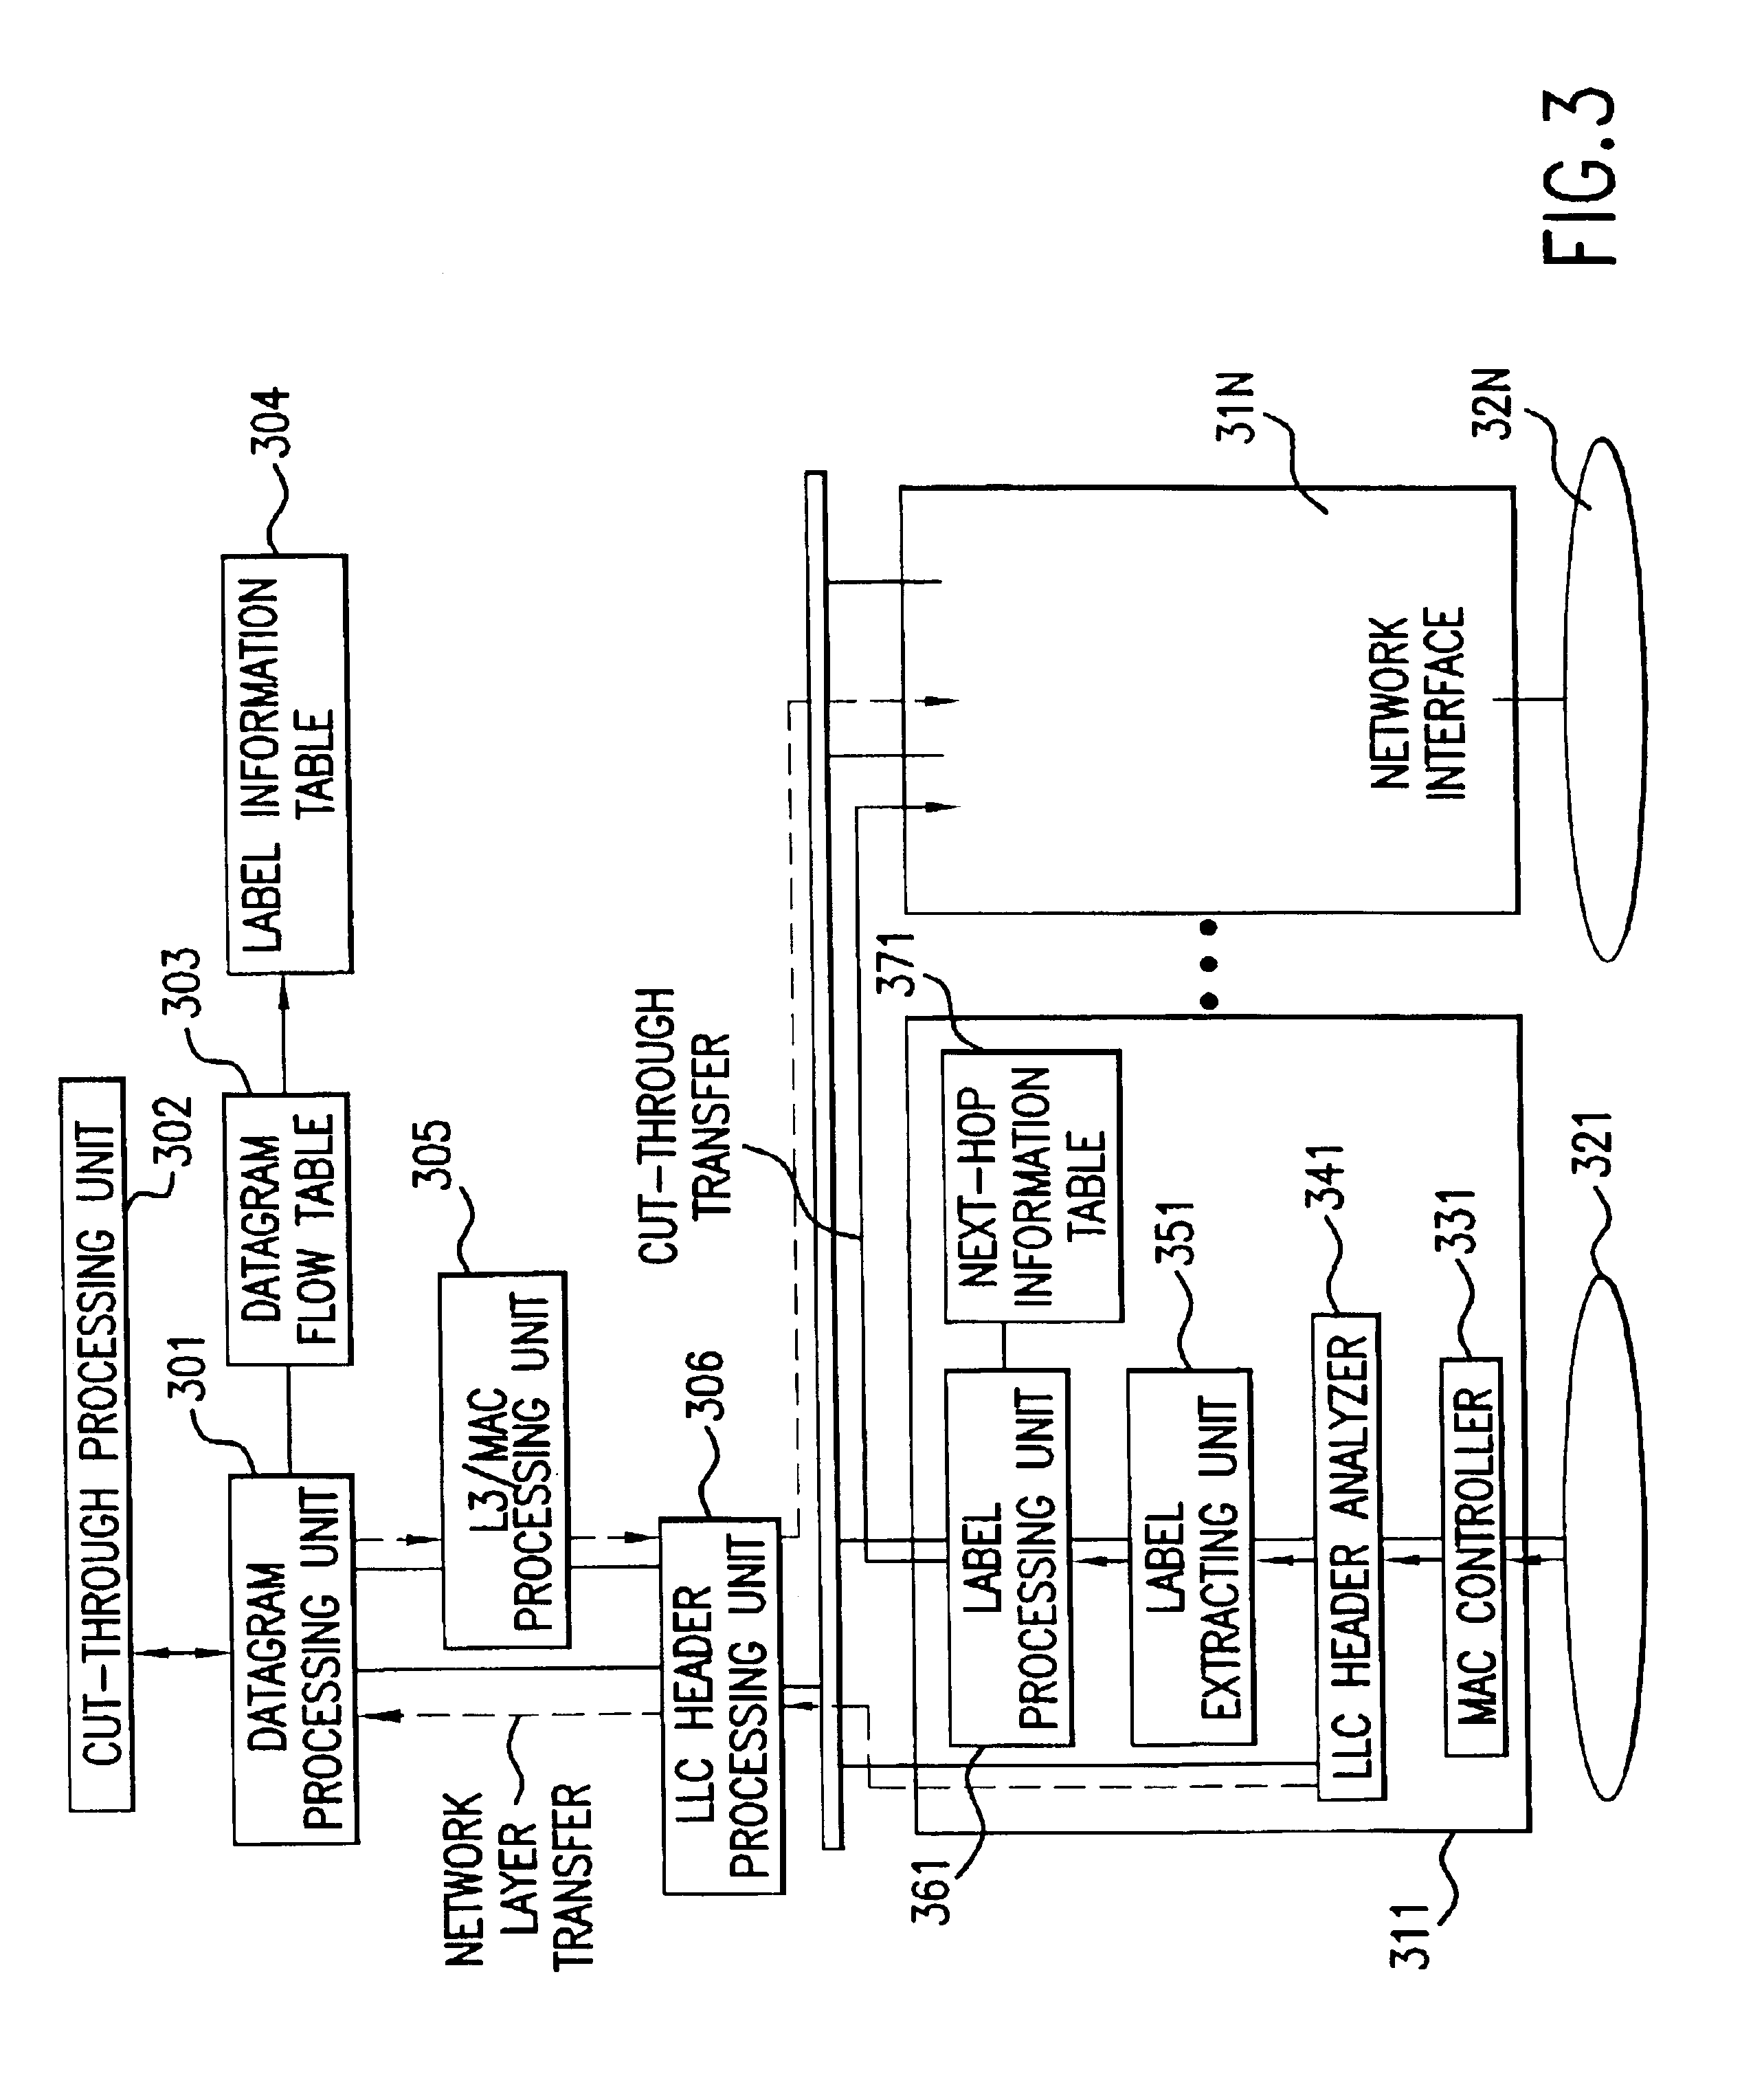 Router apparatus and frame transfer method